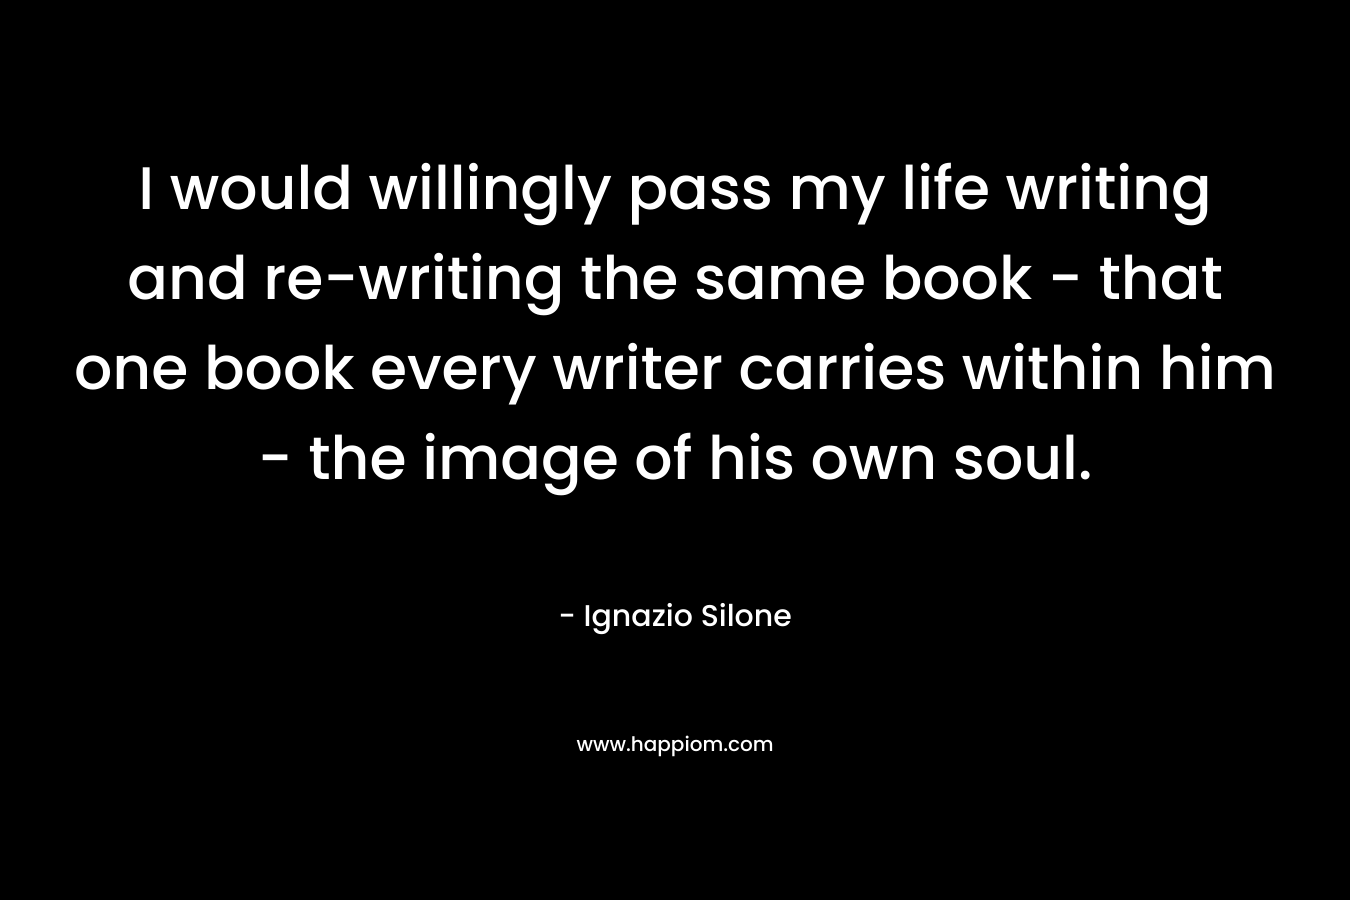 I would willingly pass my life writing and re-writing the same book - that one book every writer carries within him - the image of his own soul.